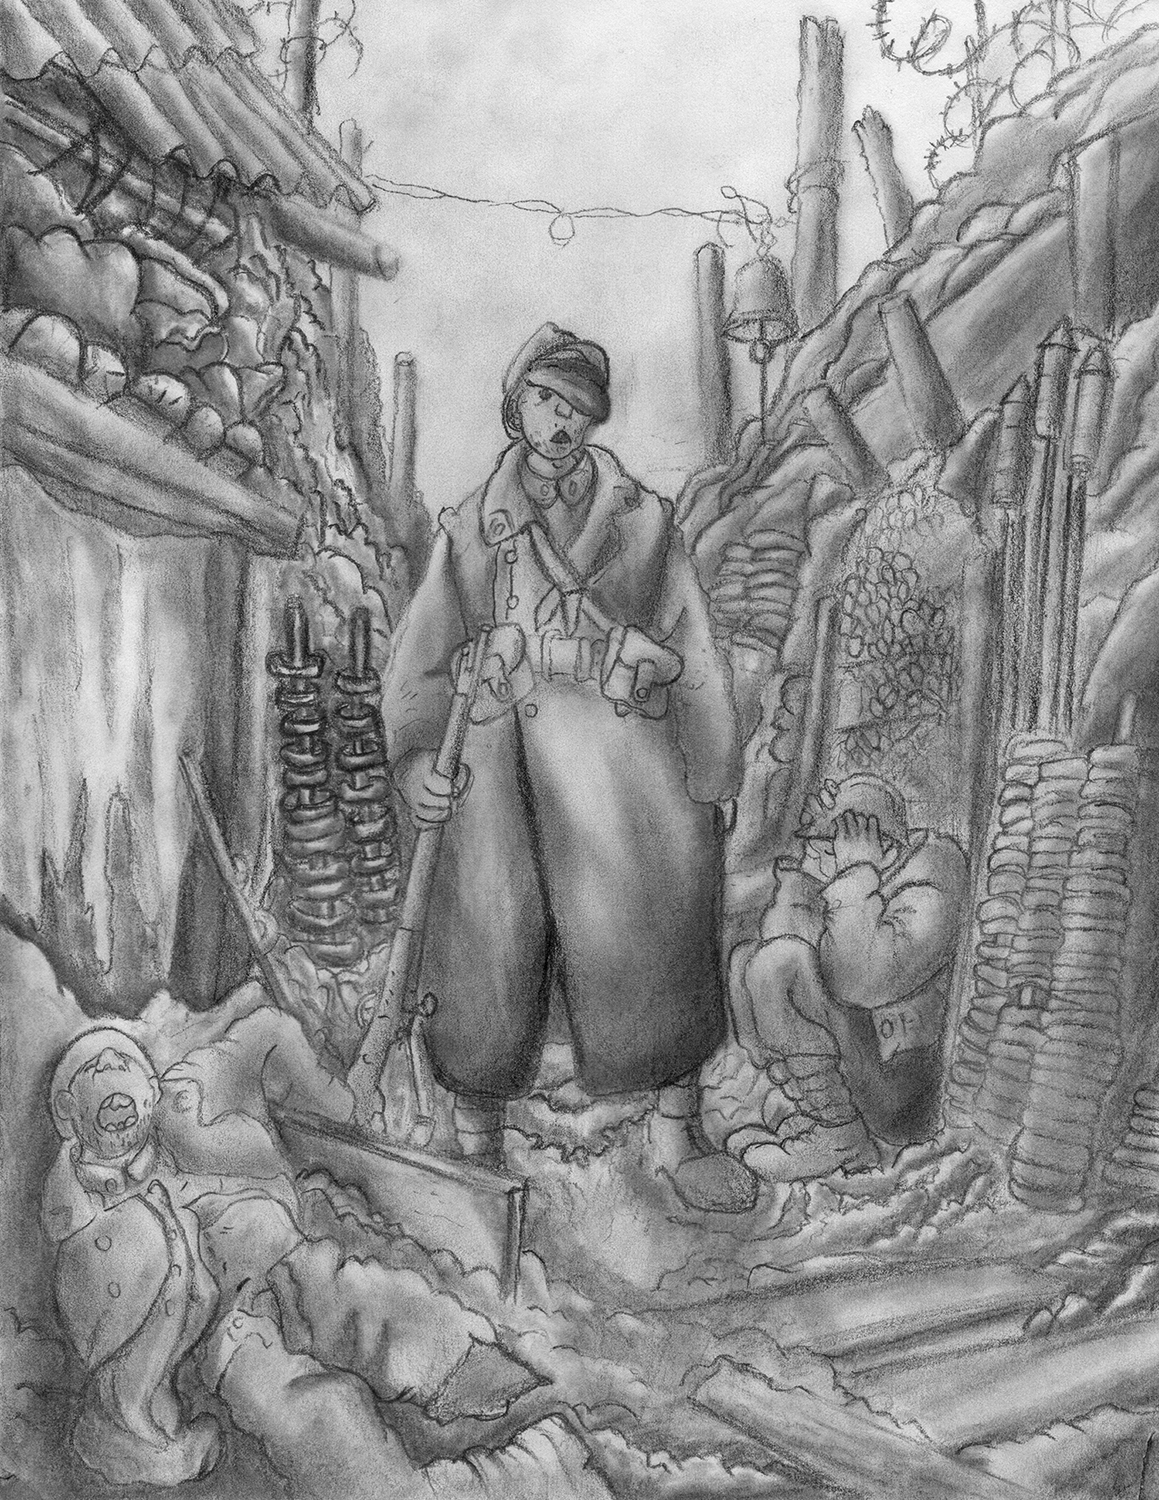 Carnage of War by Zach Blackley, graphite on paper - Innisdale Secondary School